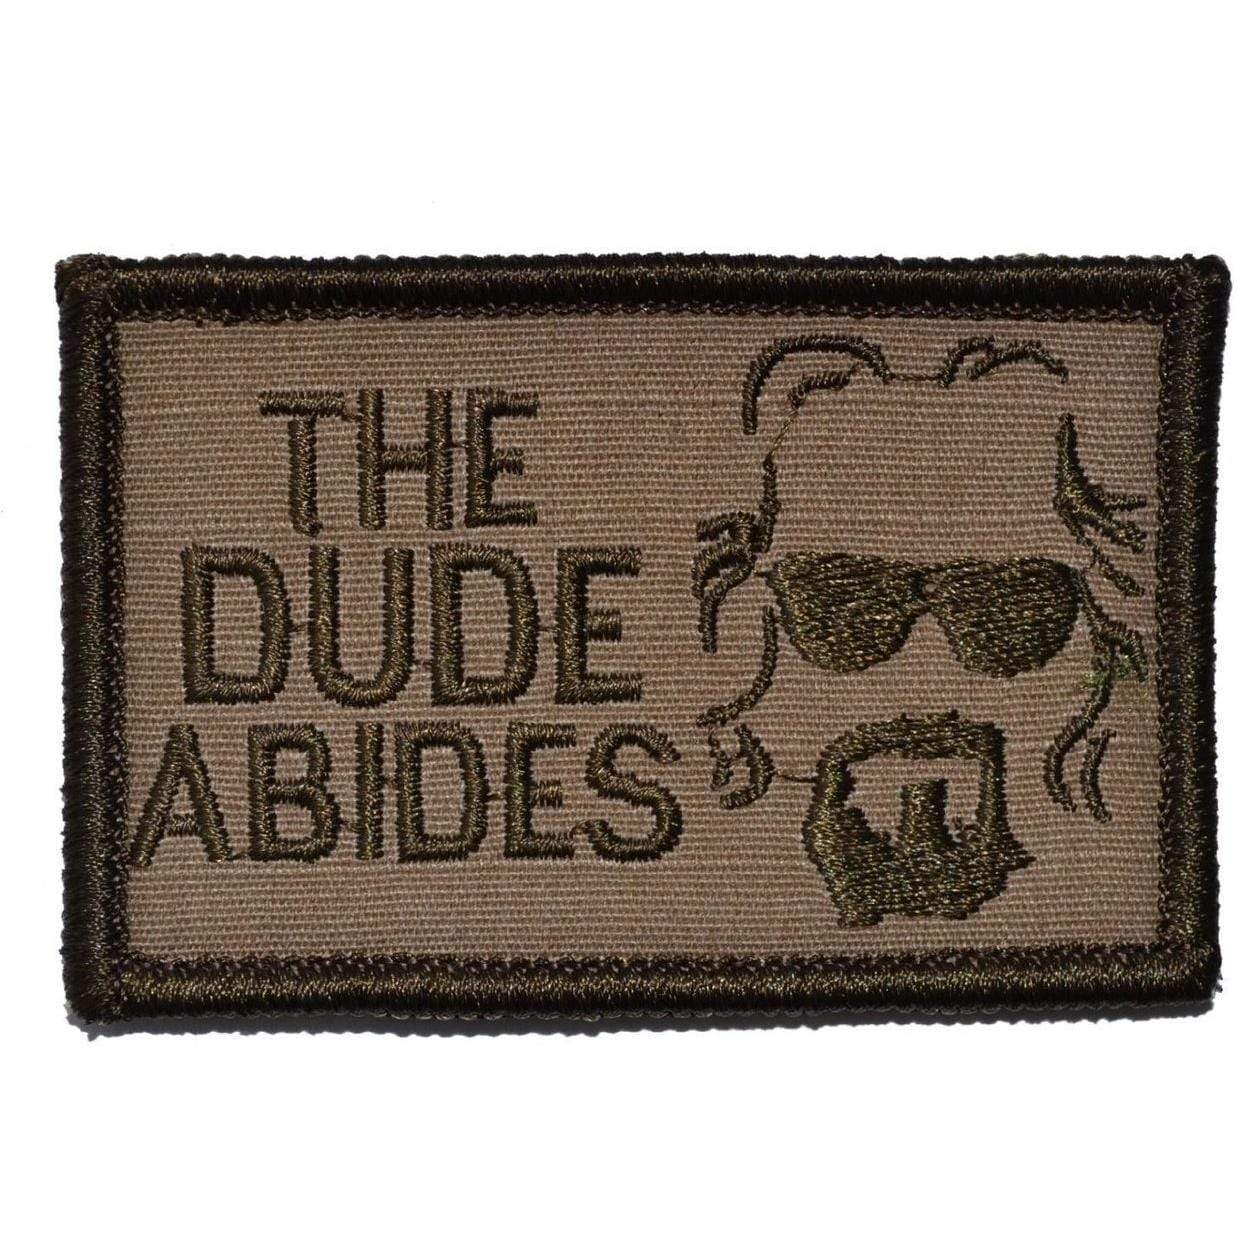 Tactical Gear Junkie Patches Coyote Brown The Dude Abides, The Big Lebowski - 2x3 Patch